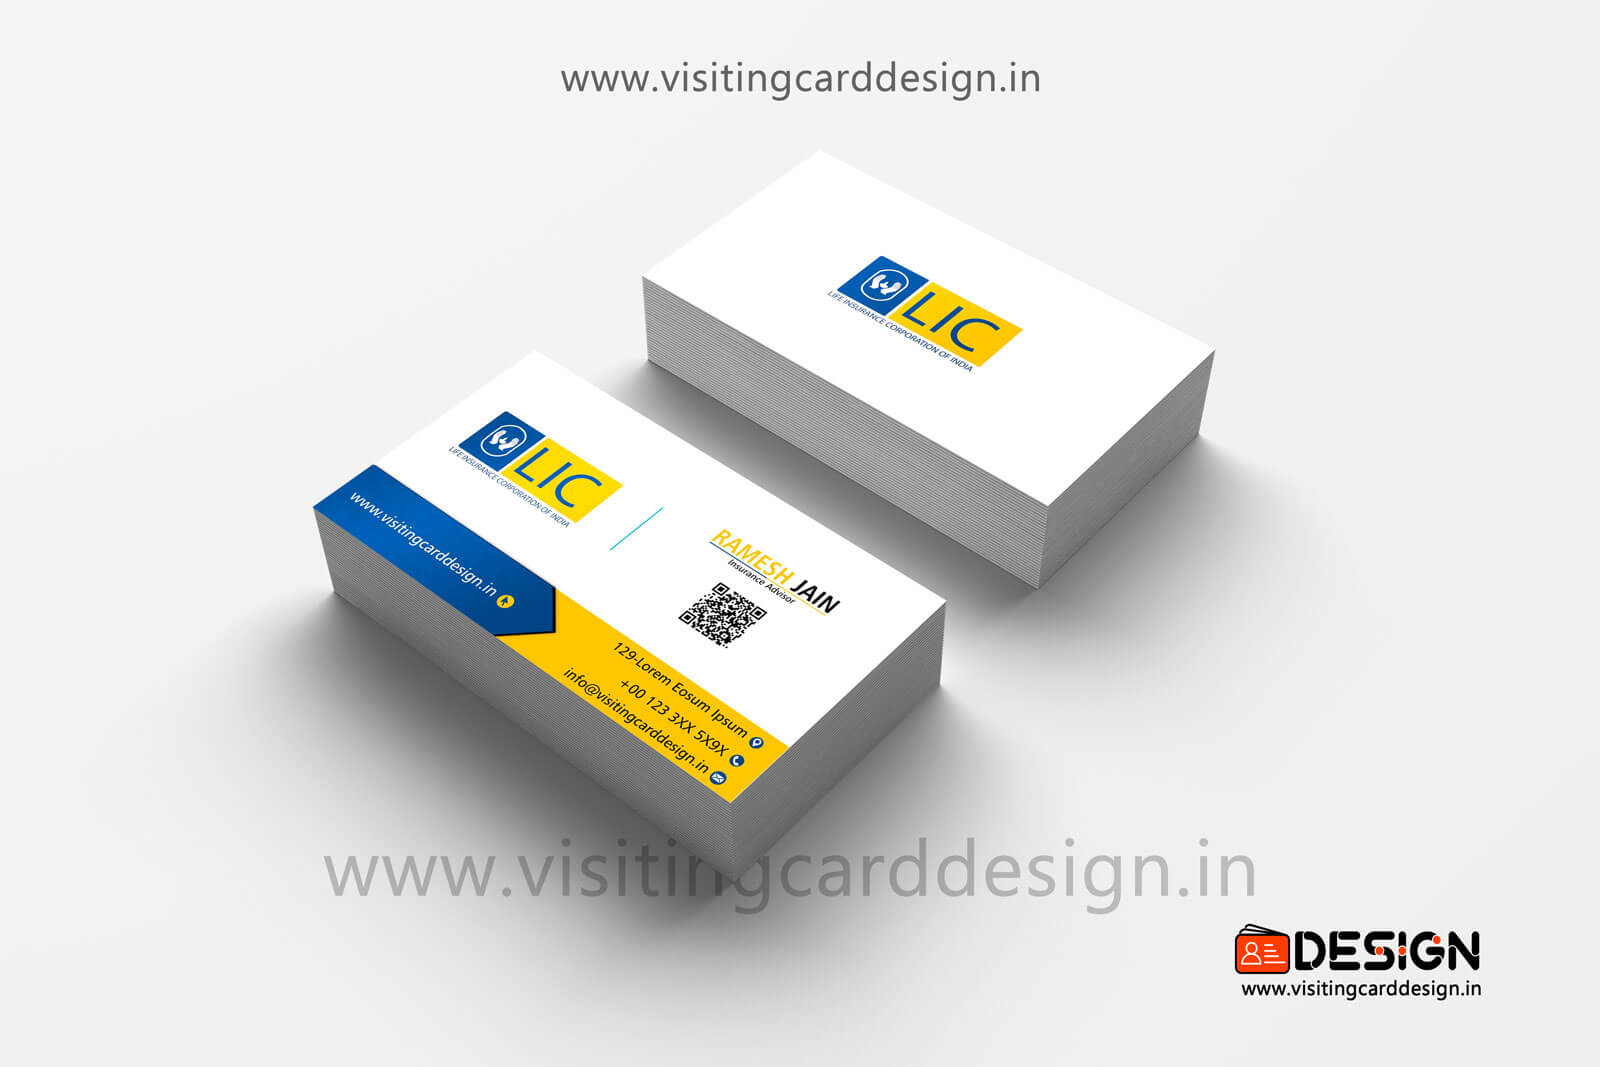 Lic Visiting Cards Design in Cdr Free download 2021